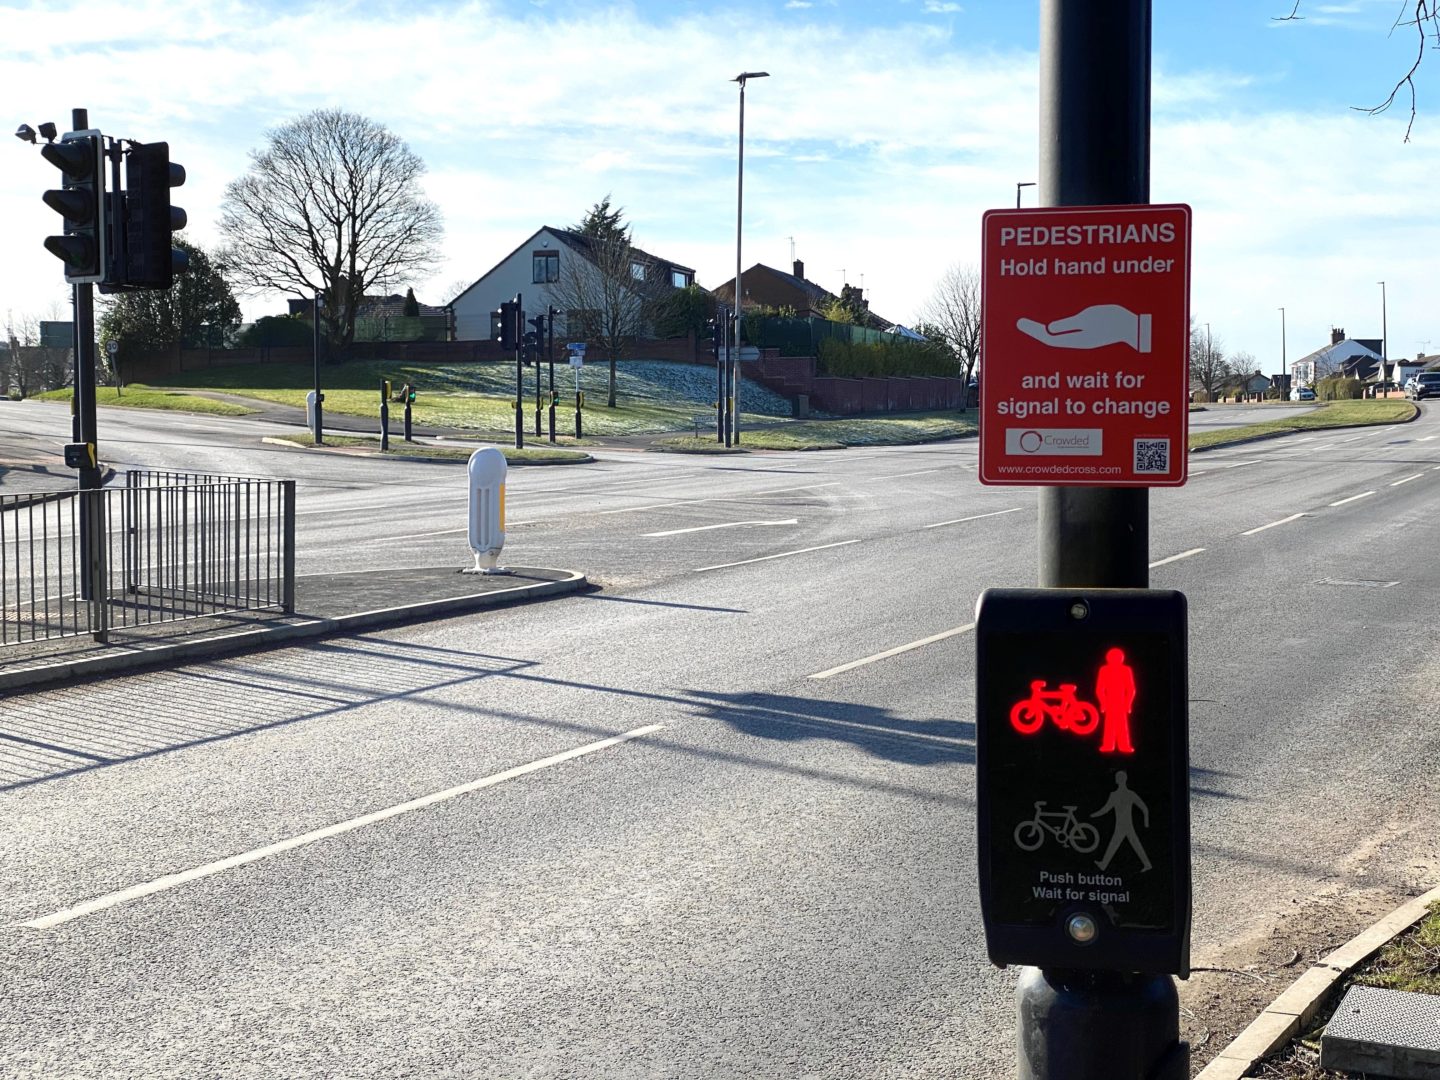 Image of pedestrian crossing signal box on red. Above is a sign for instructing users to wave their hand underneath to activate the signal box,